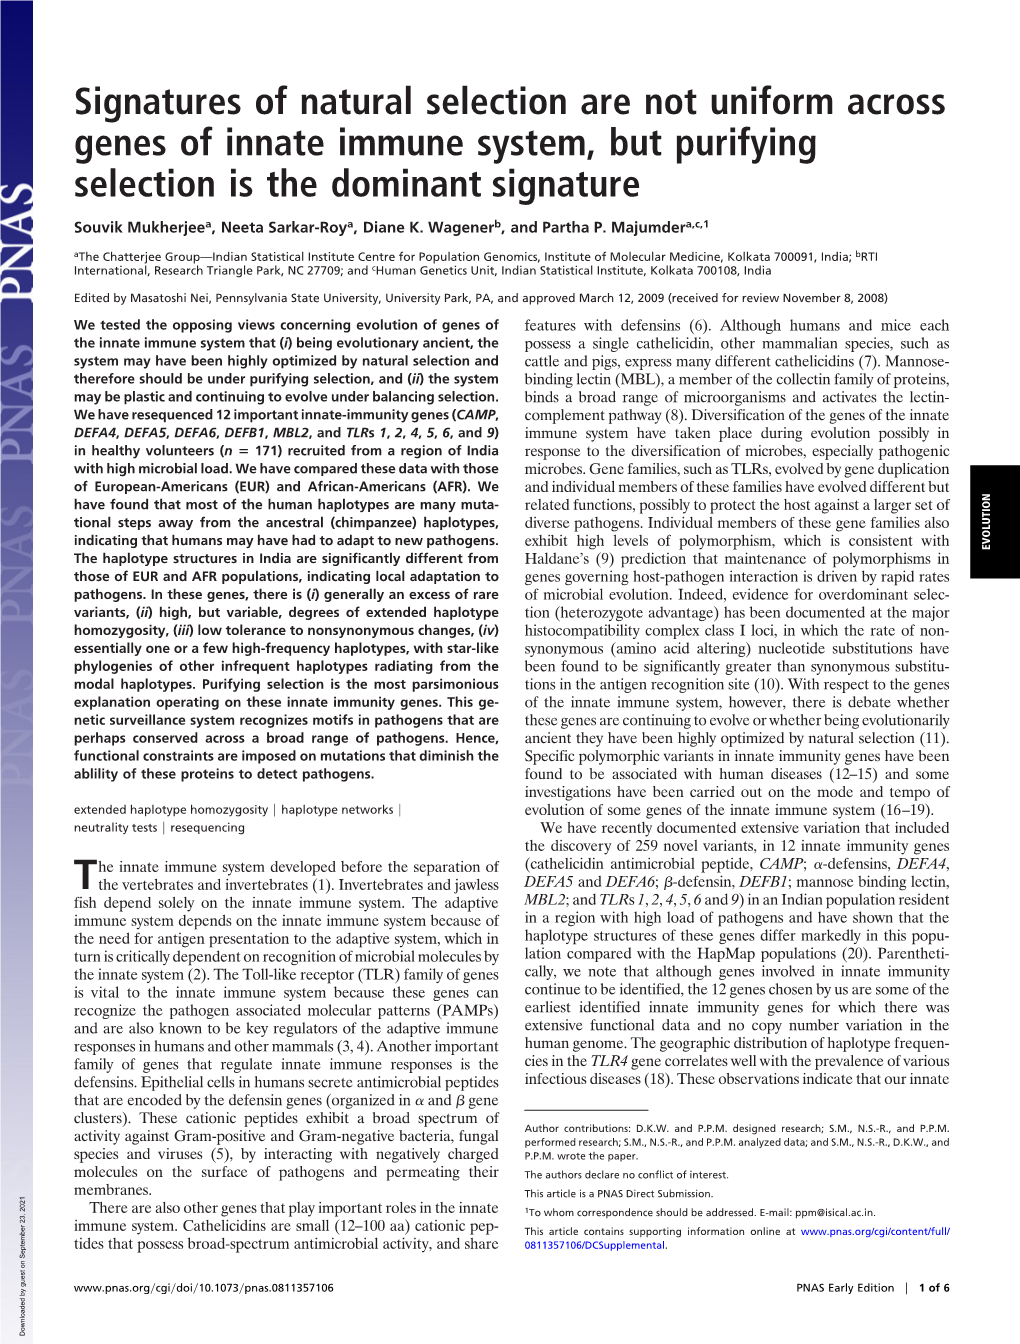 Signatures of Natural Selection Are Not Uniform Across Genes of Innate Immune System, but Purifying Selection Is the Dominant Signature